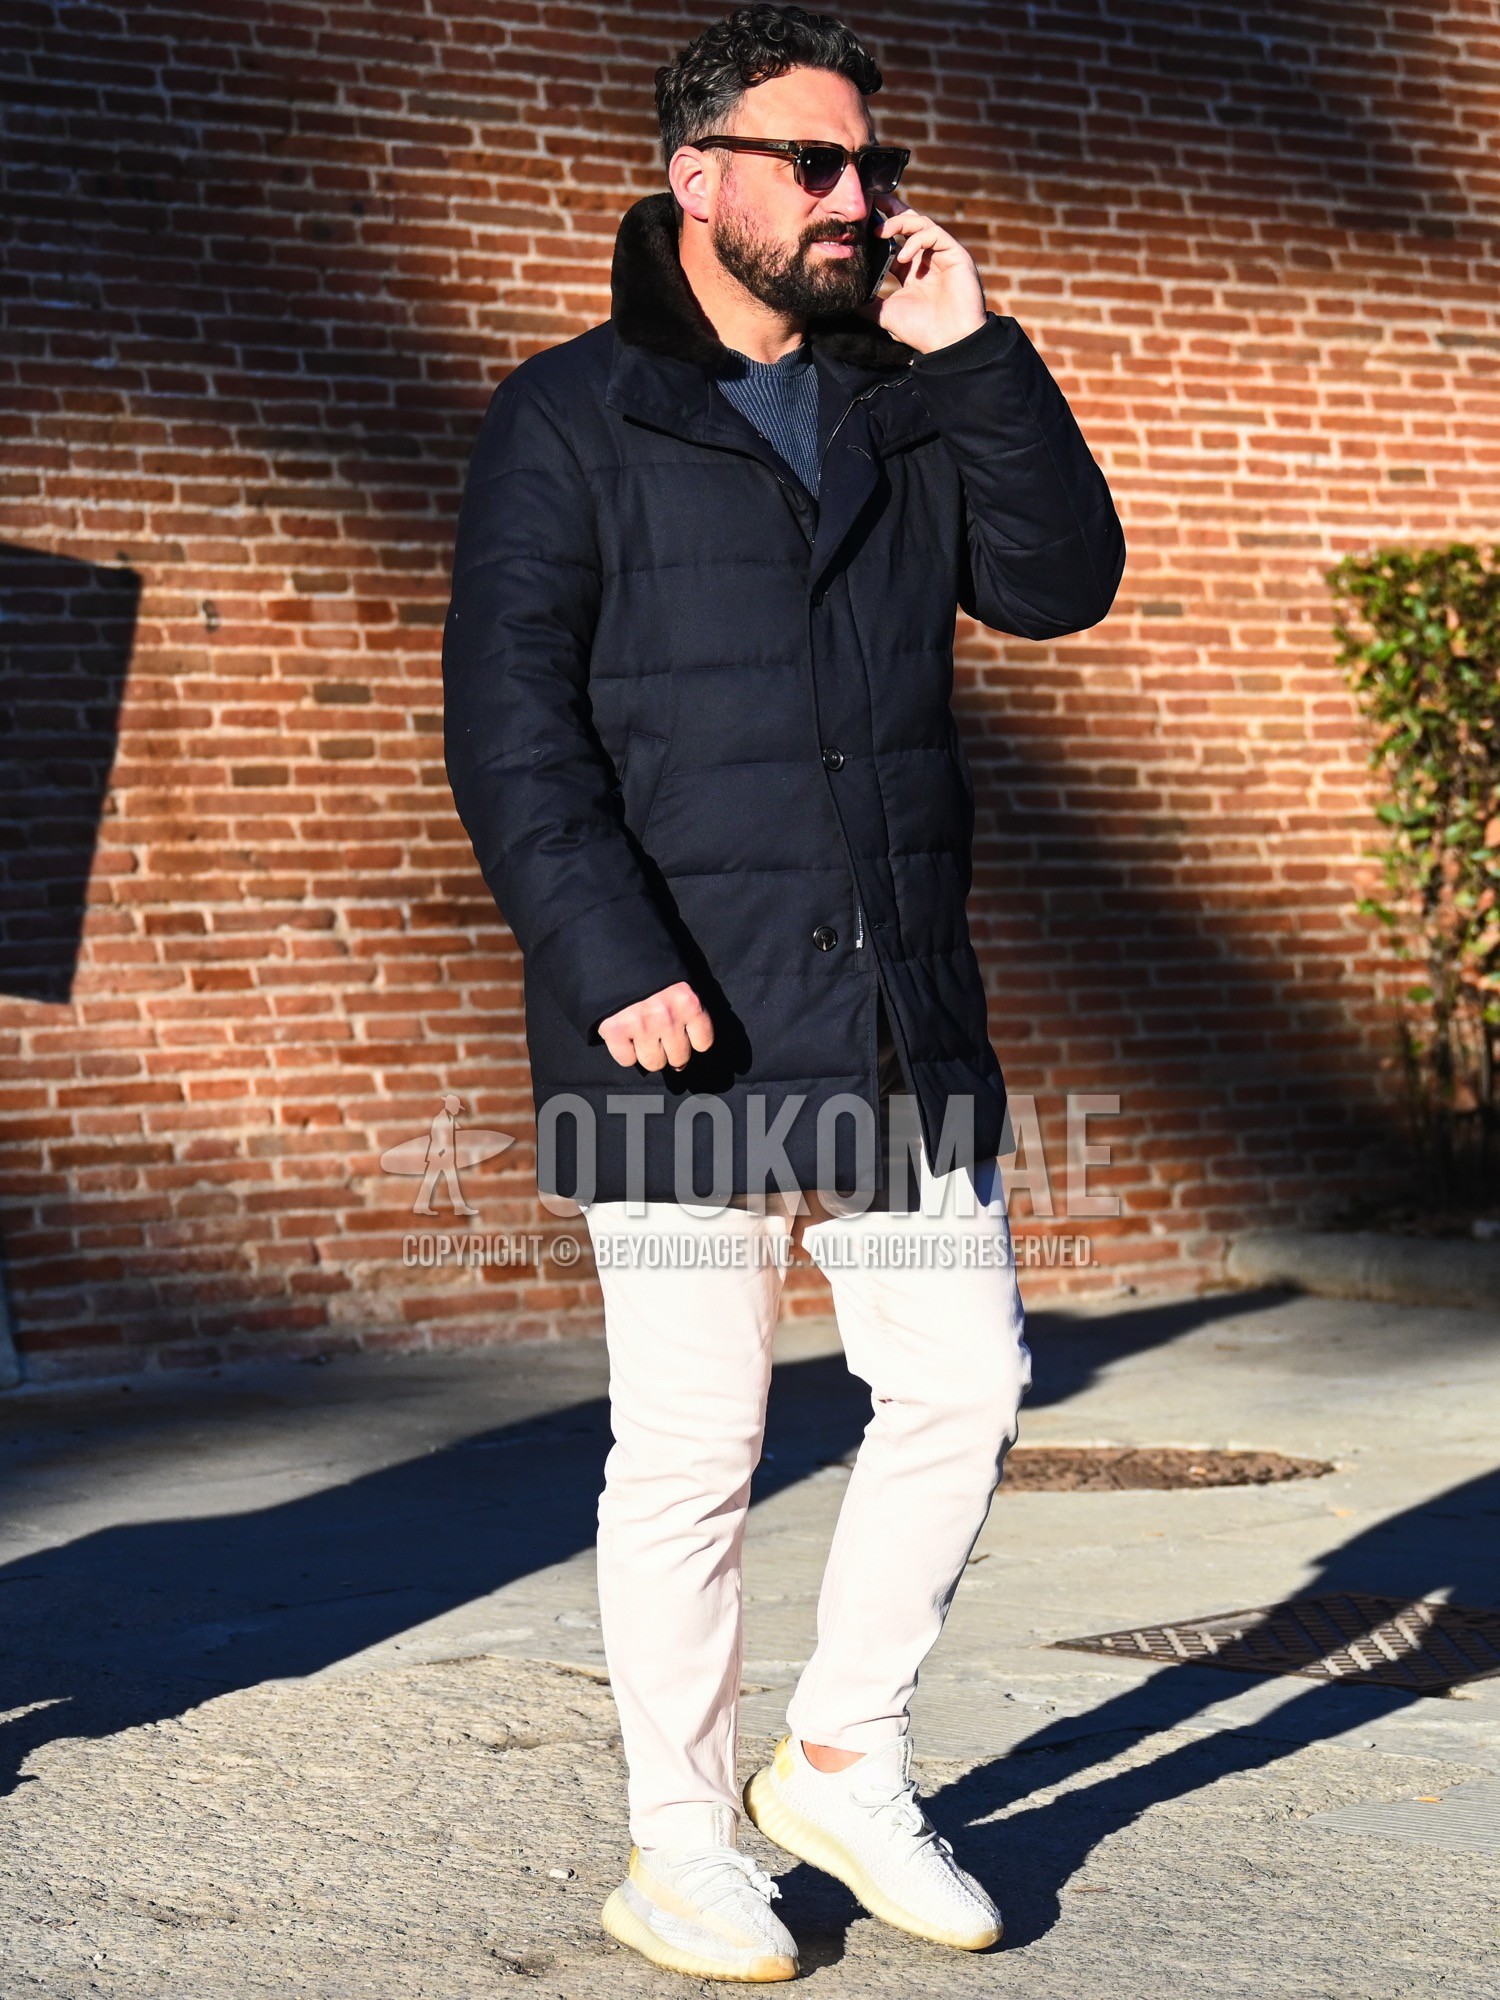 Men's autumn winter outfit with brown tortoiseshell sunglasses, navy plain down jacket, blue plain sweater, white plain chinos, white low-cut sneakers.